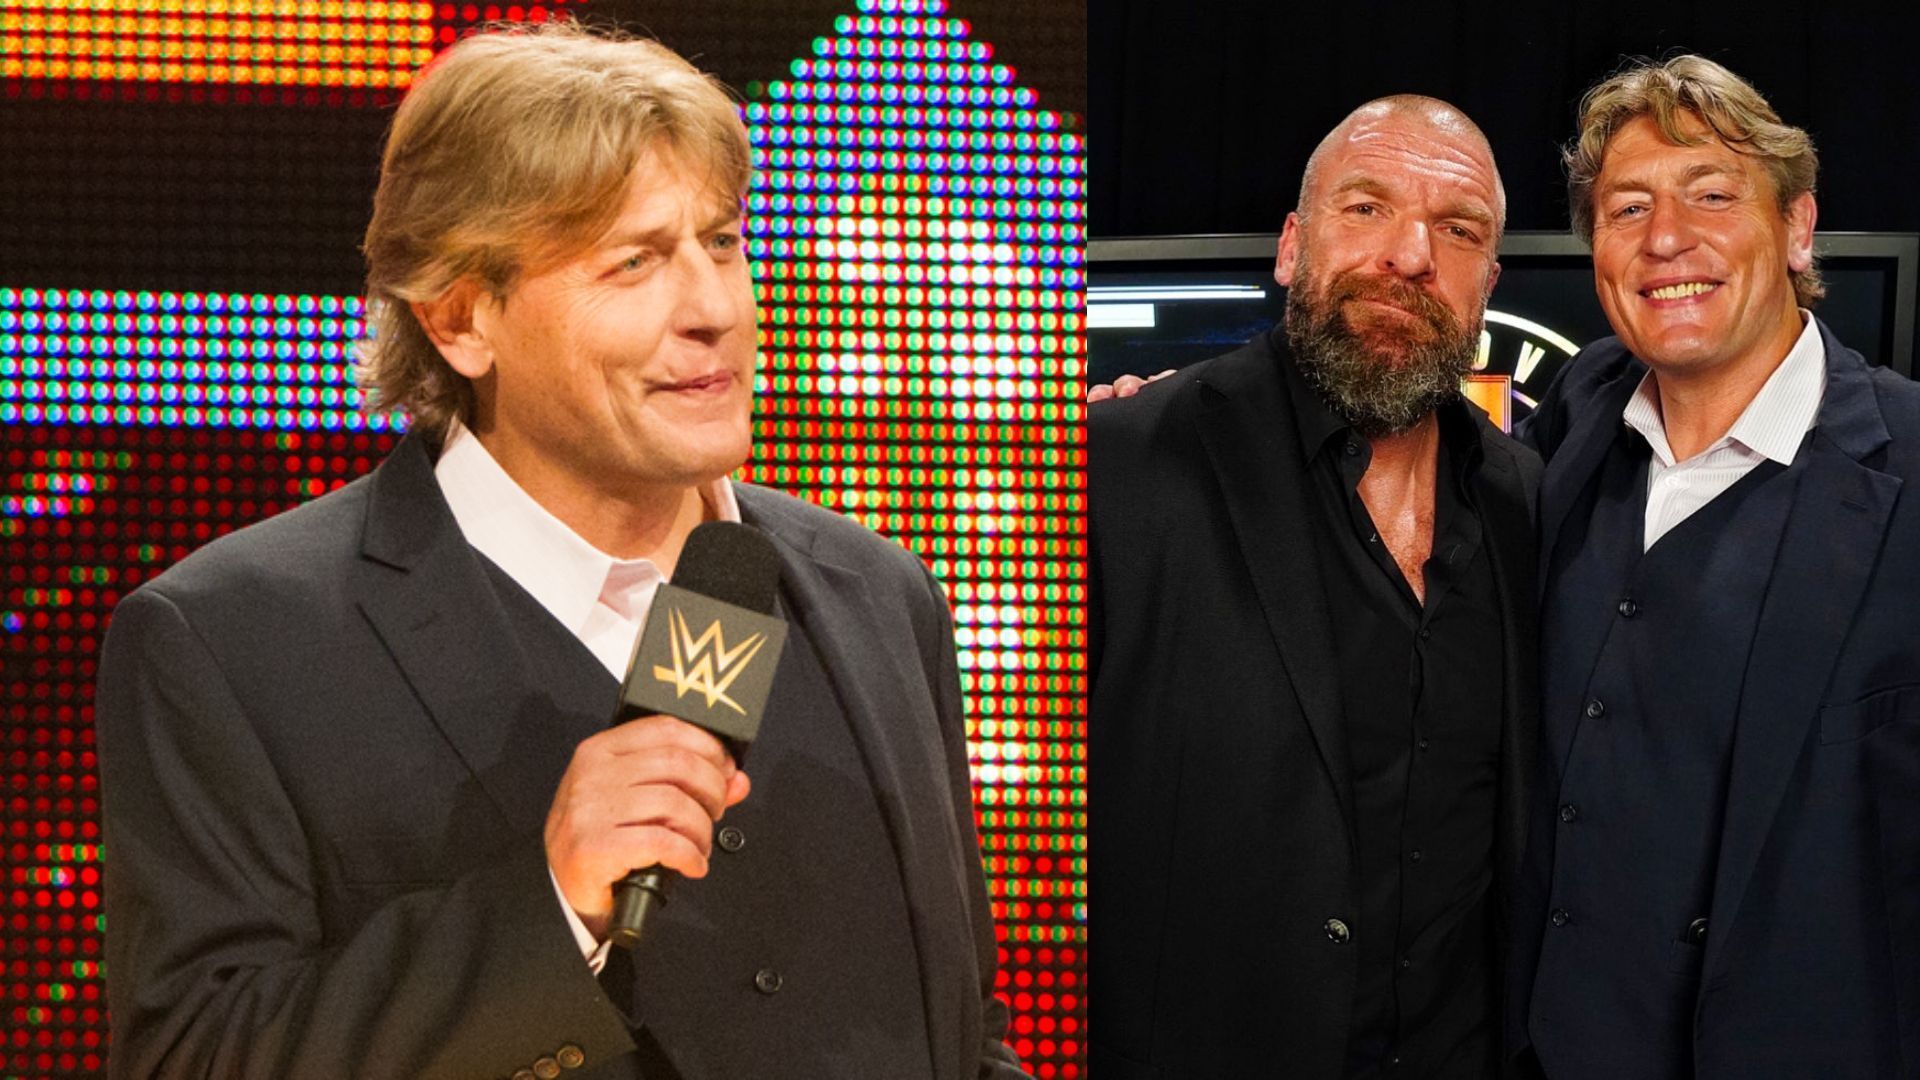 William Regal was released from his WWE contract on January 5, 2022